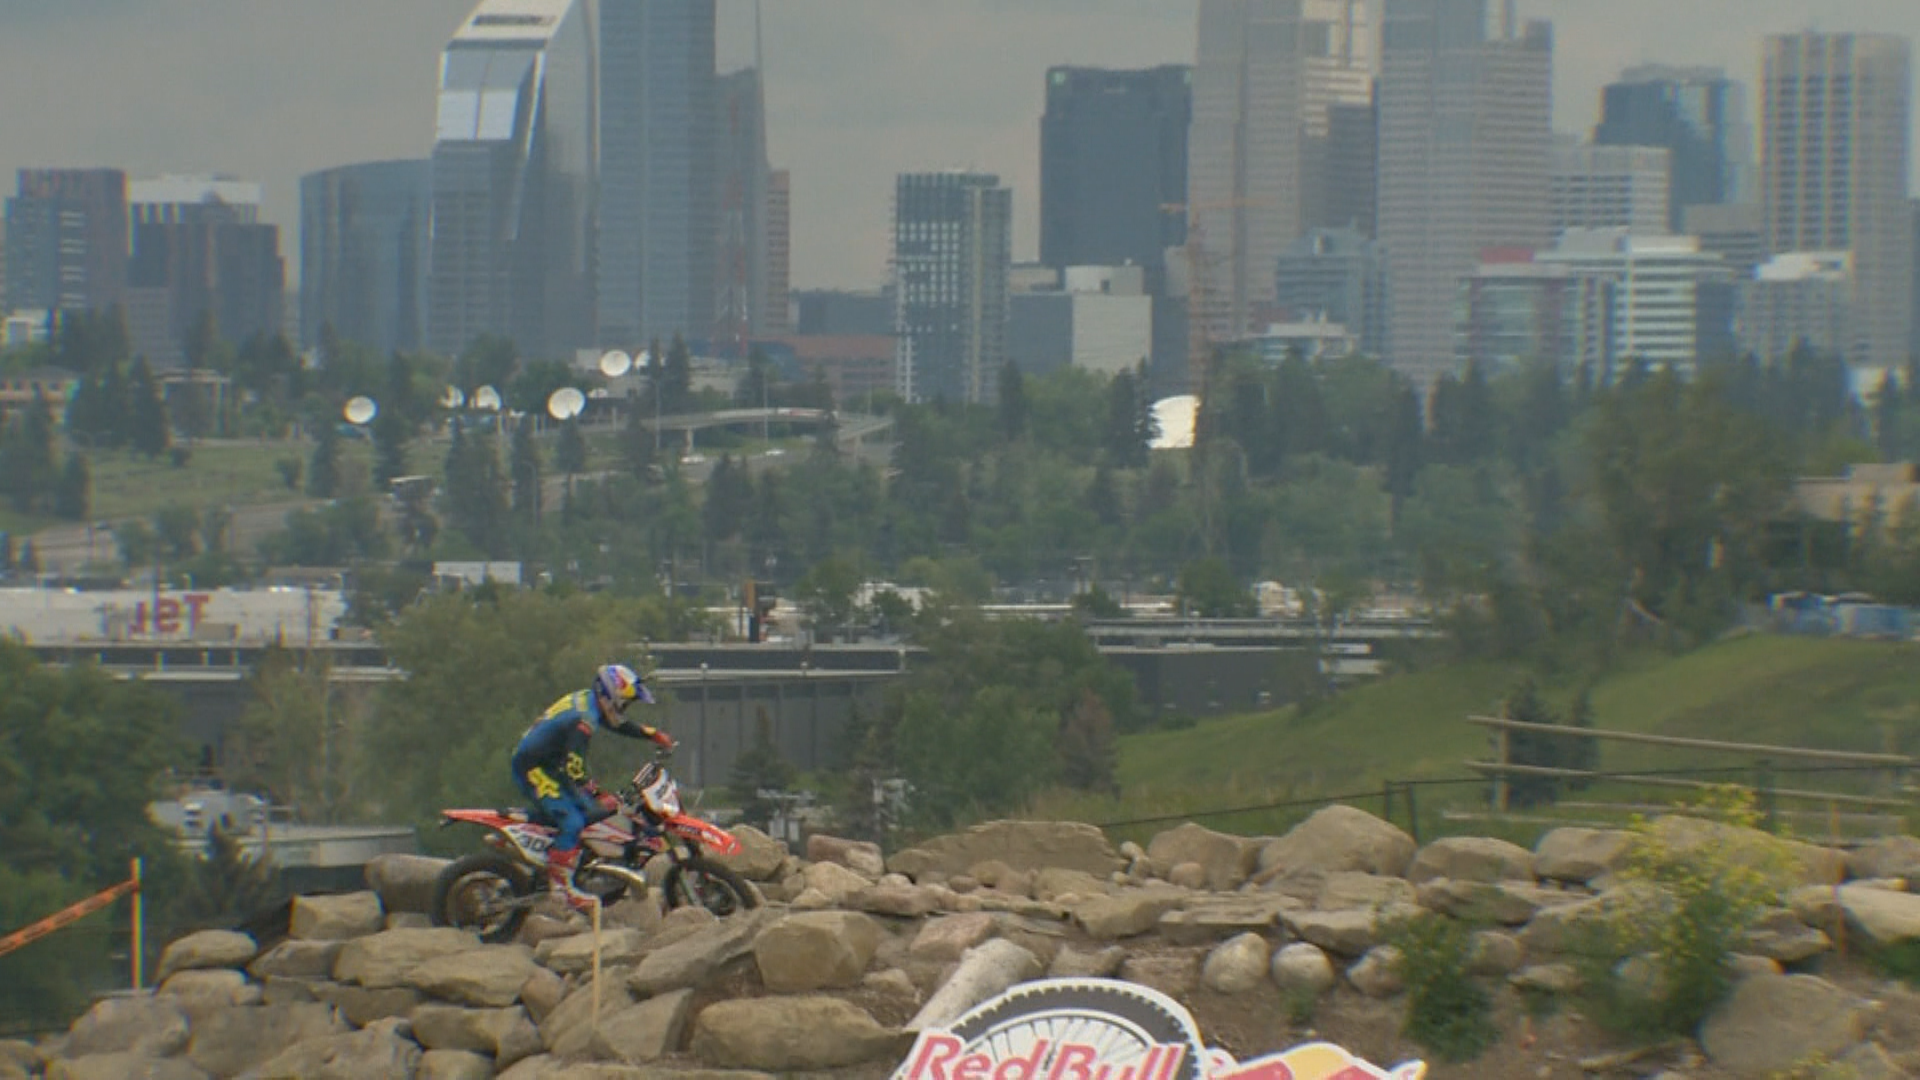 Calgary motocross track at risk of closure as city eyes site for bus barns